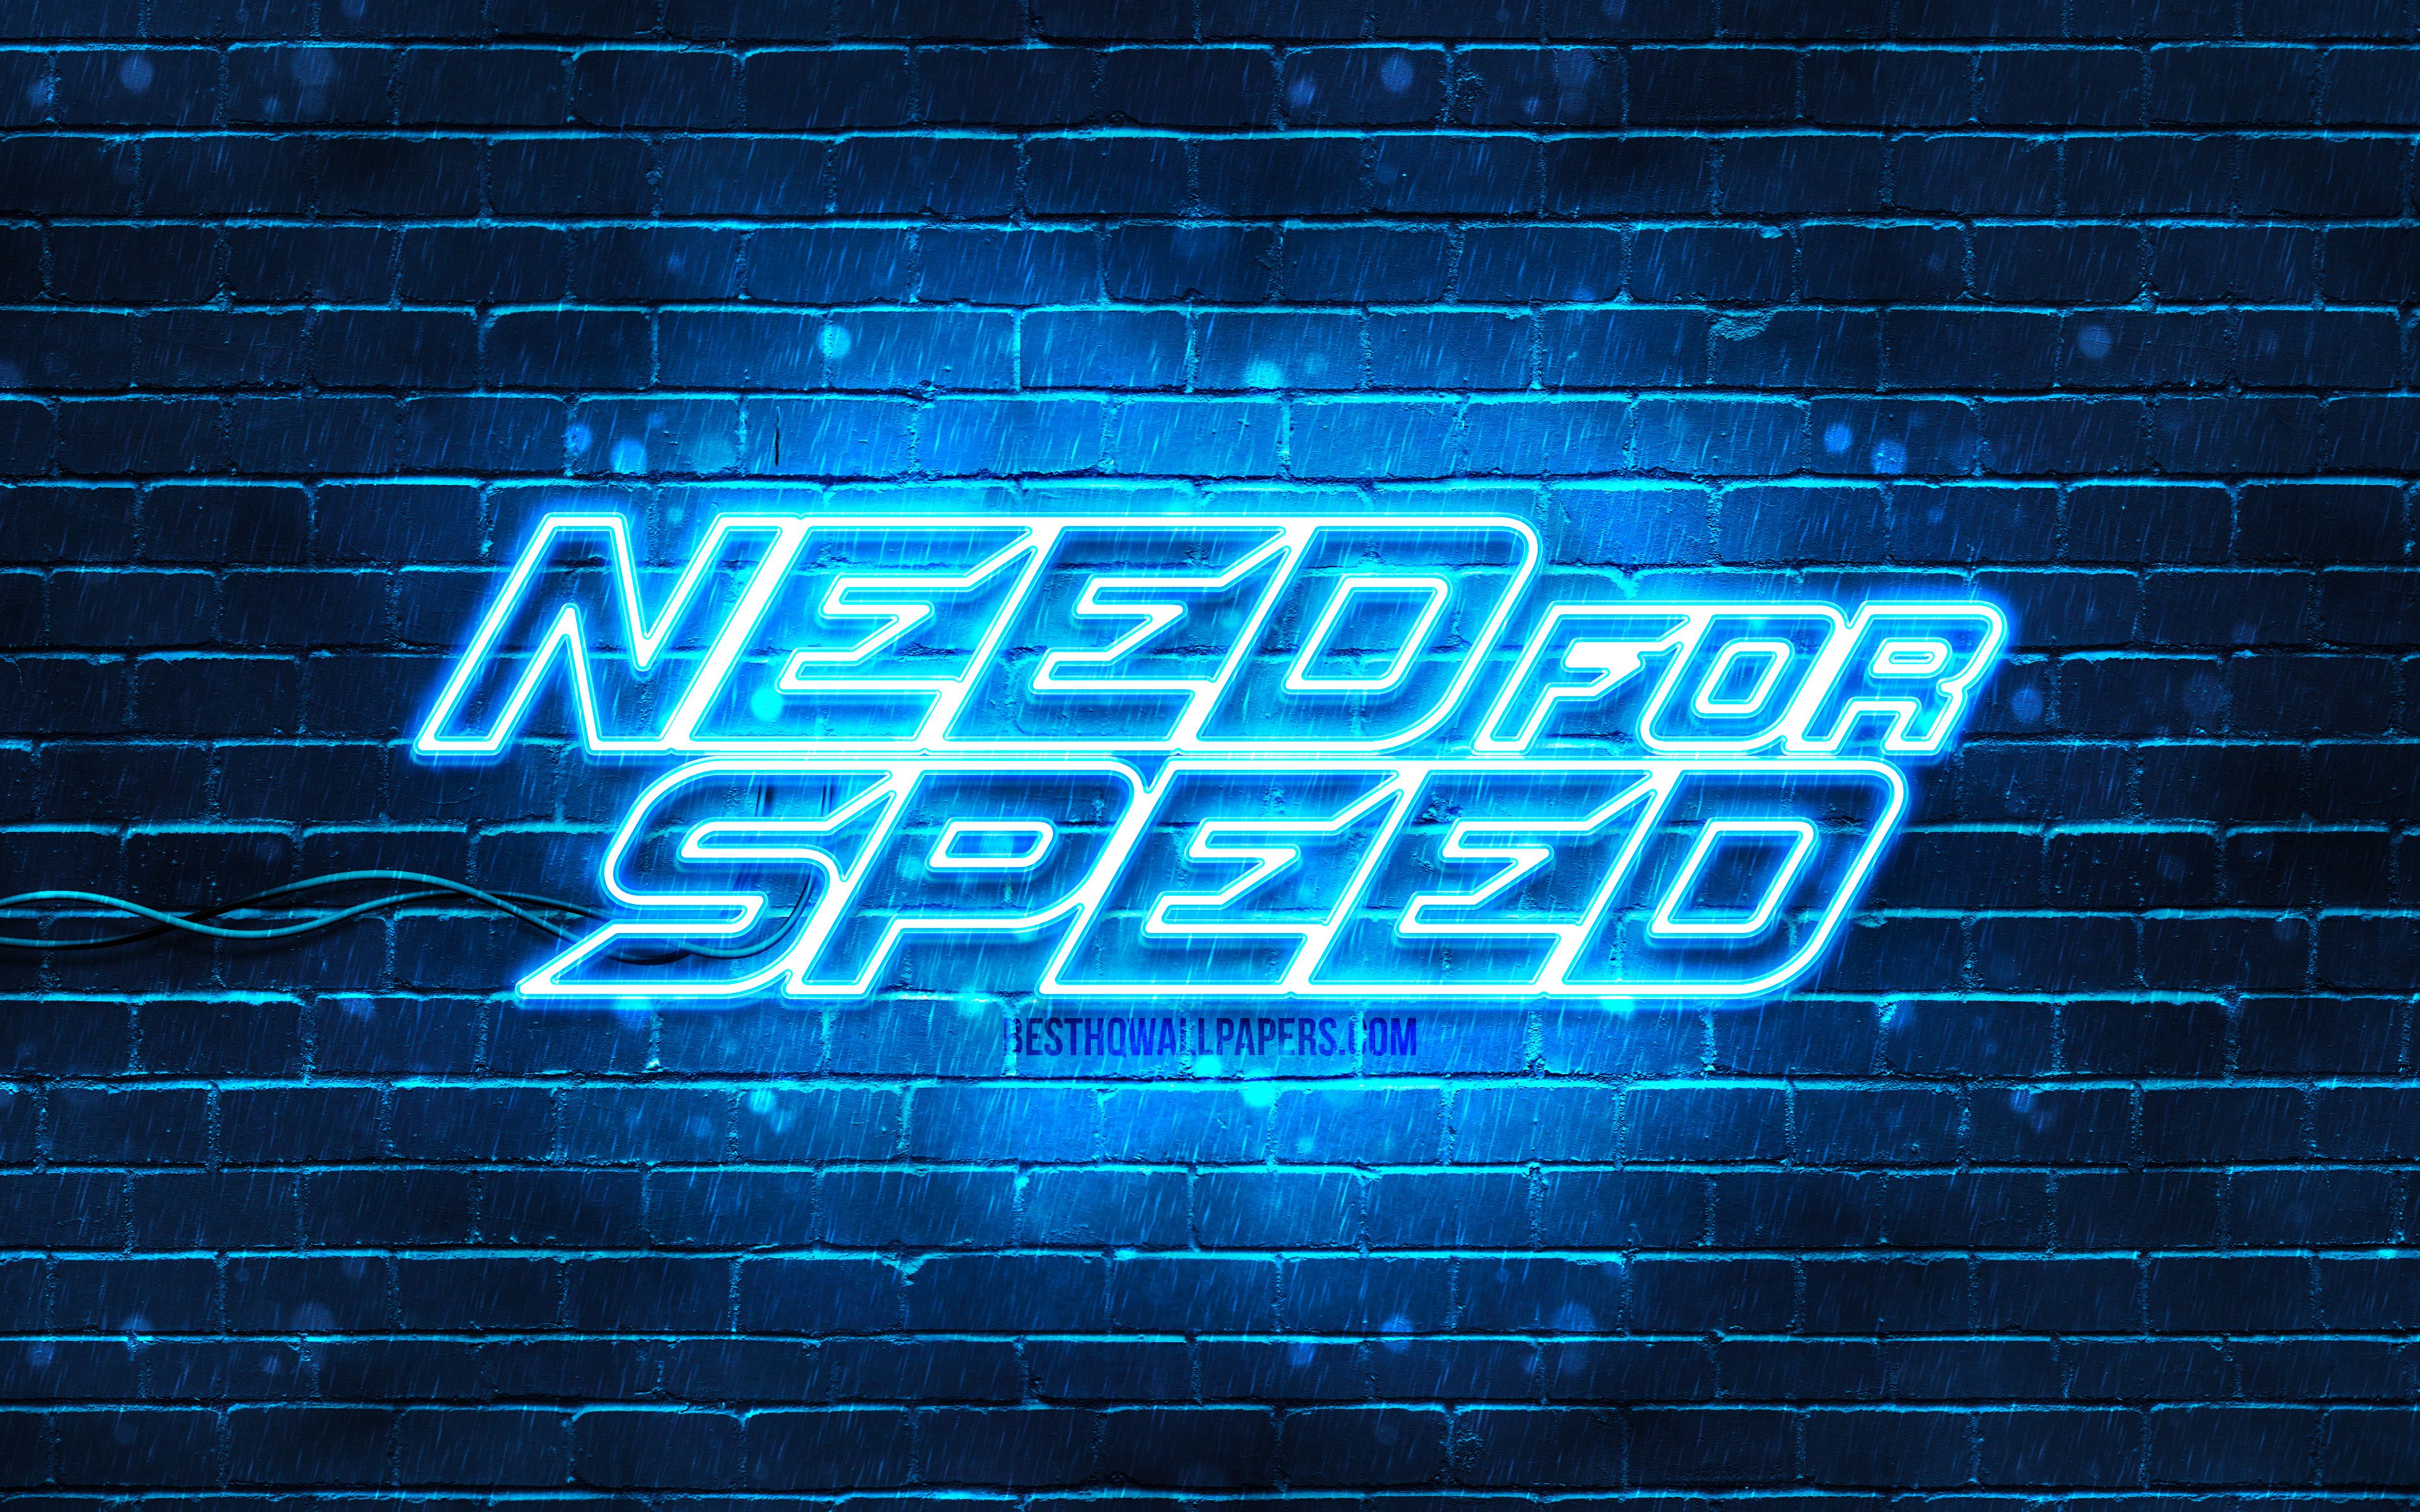 Download wallpaper Need for Speed blue logo, 4k, blue brickwall, NFS, 2020 games, Need for Speed logo, NFS neon logo, Need for Speed for desktop with resolution 3840x2400. High Quality HD picture